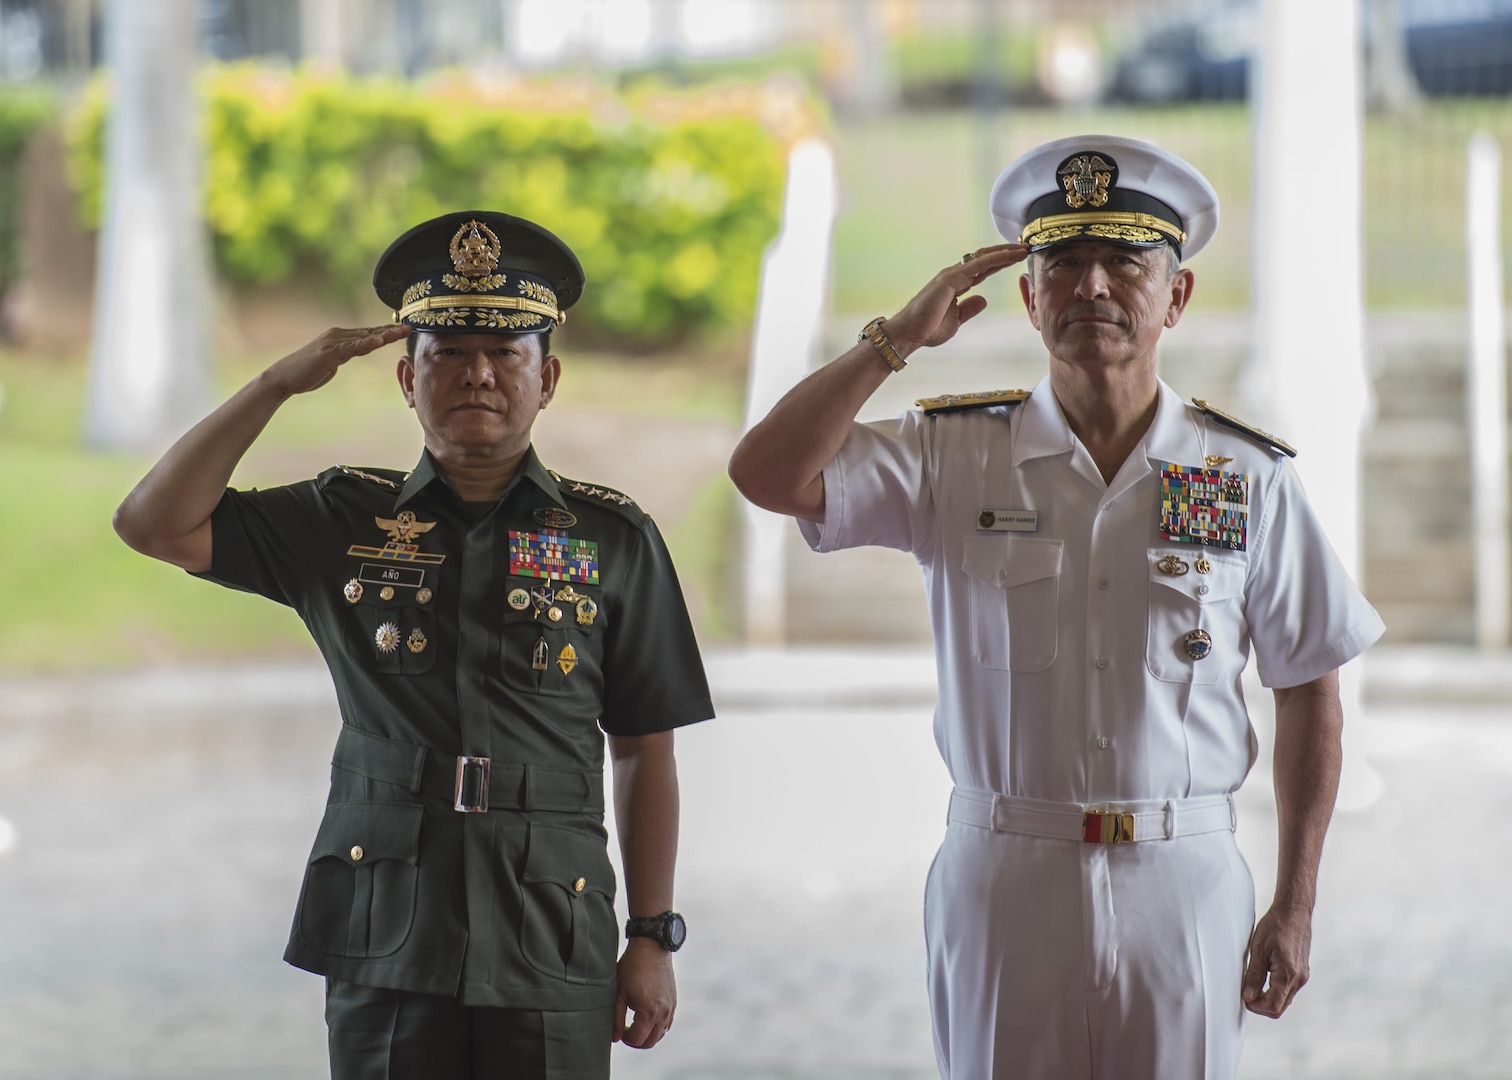 CAMP H.M. SMITH, Hawaii (Sept. 28, 2018) — Adm. Harry Harris, Commander of U.S. Pacific Command (PACOM), and Gen. Eduardo Año, Chief of Staff for the Armed Forces of the Philippines, are welcomed at PACOM headquarters during an honors ceremony. During Año’s two-day visit to PACOM, he and Harris will meet to discuss changes to the Mutual Defense Board and Security Engagement Board. The Mutual Defense Board provides direct liaison and consultation on military matters of mutual concern to develop and improve both countries’ common defense. The Security Engagement Board provides the framework and mechanism for continuing liaison and consultation on non-traditional threats to security such as terrorism, transnational crimes, maritime security, and natural and man-made disasters. (U.S. Navy photo by Mass Communication Specialist 2nd Class James Mullen/Released)